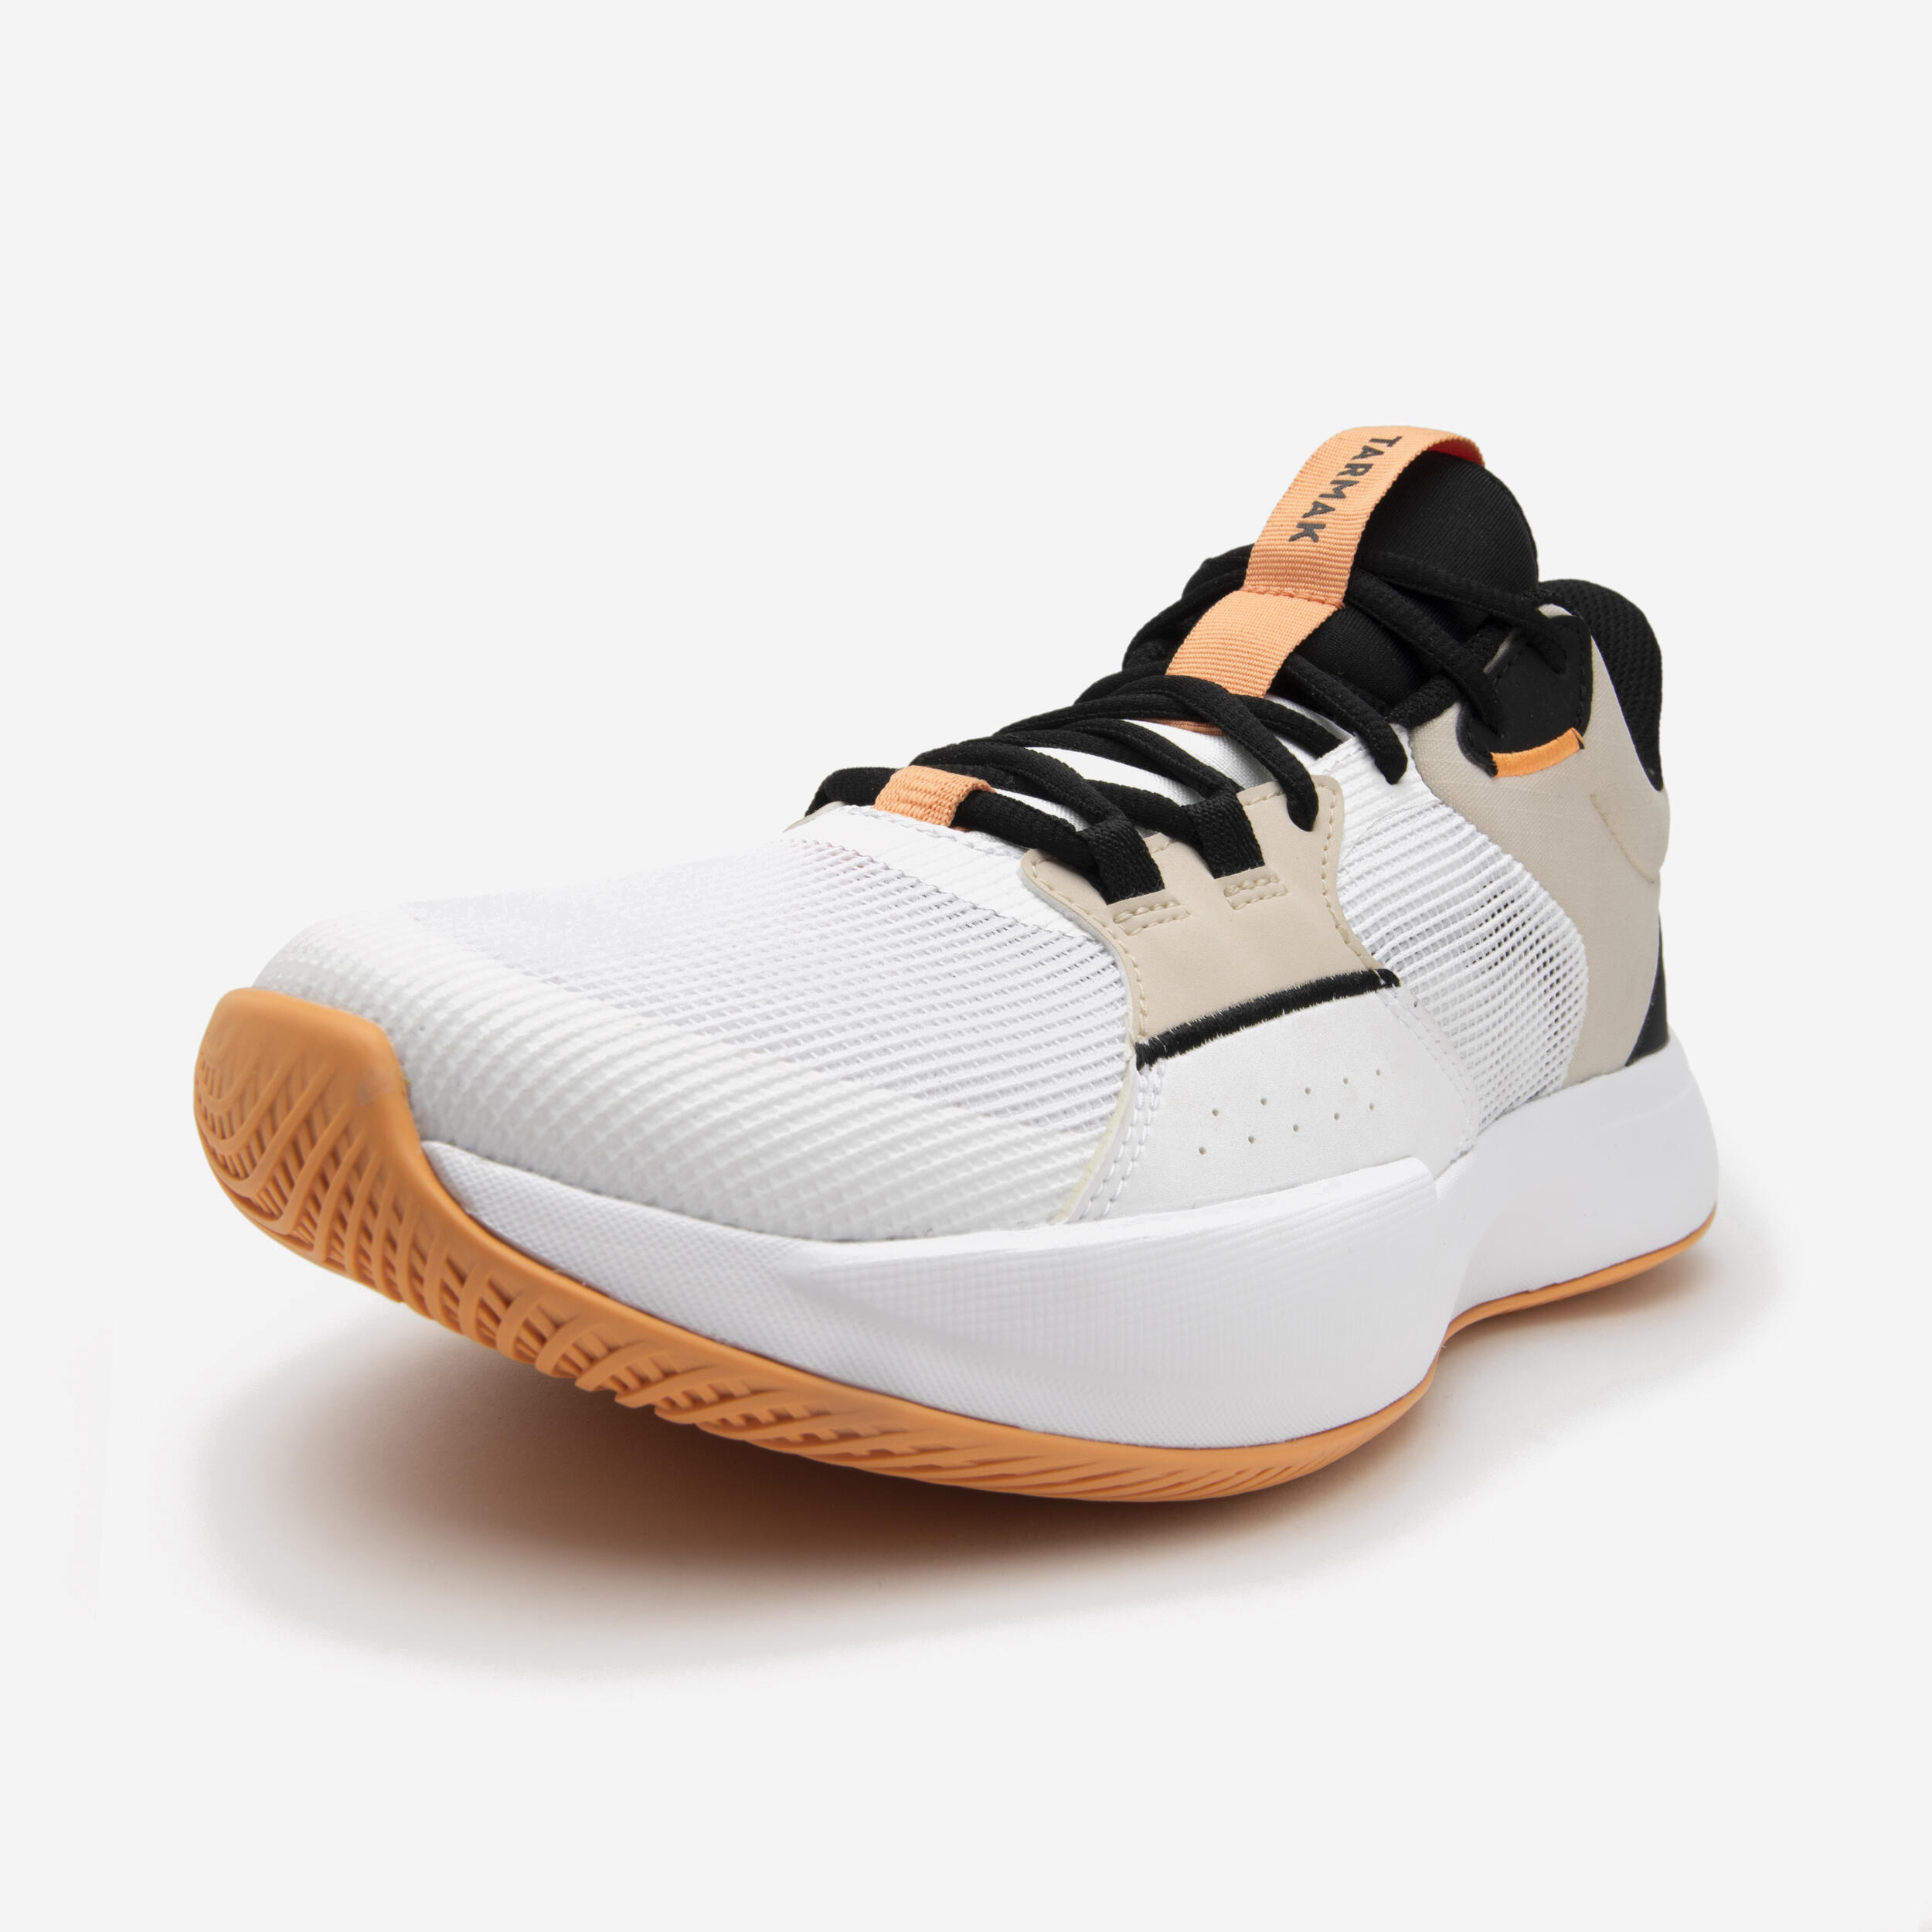 Men's/Women's Basketball Shoes Fast 500 Low - White 7/8